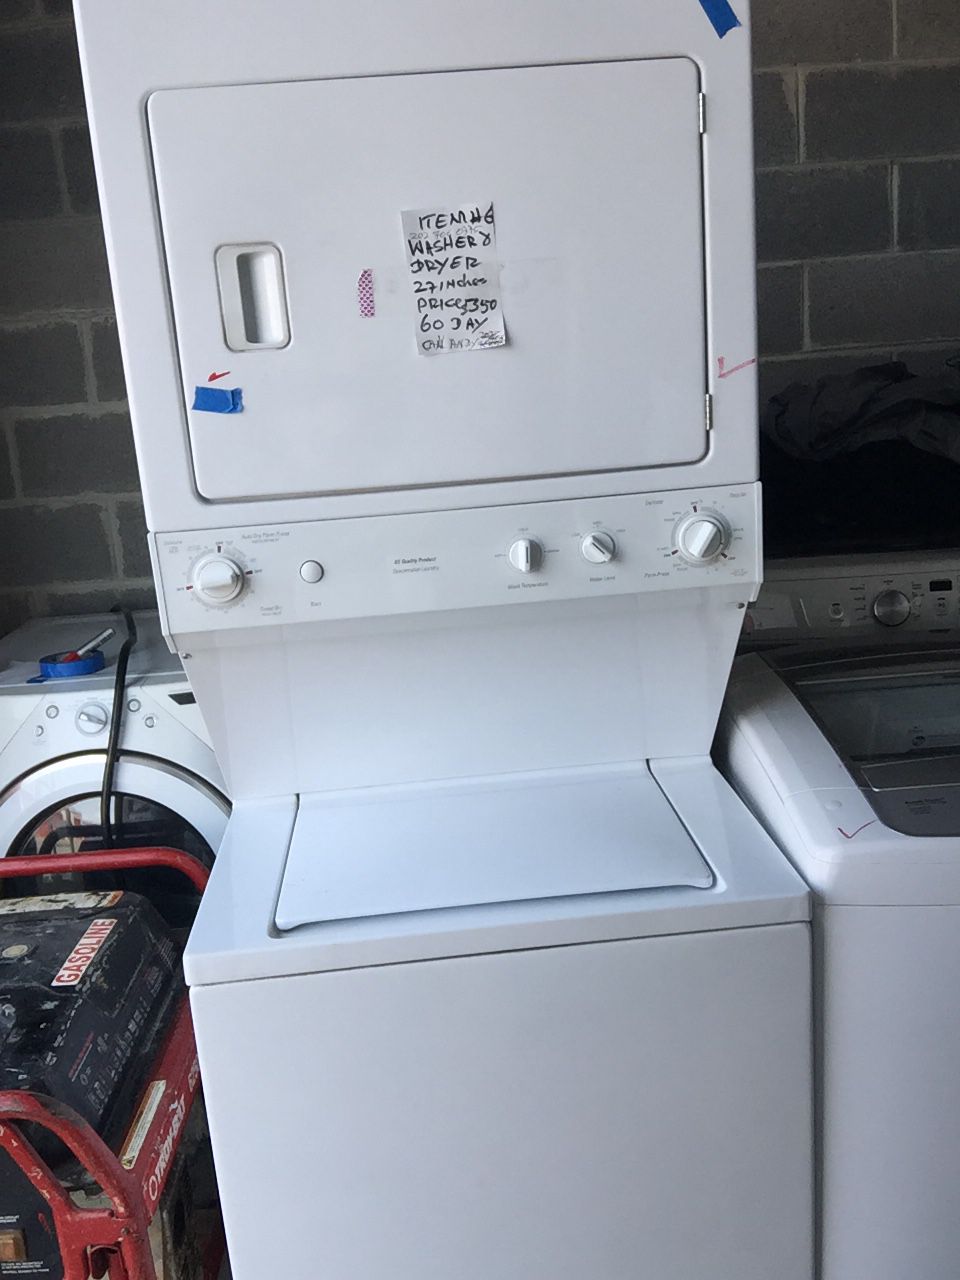 GE washer/electric dryer#6